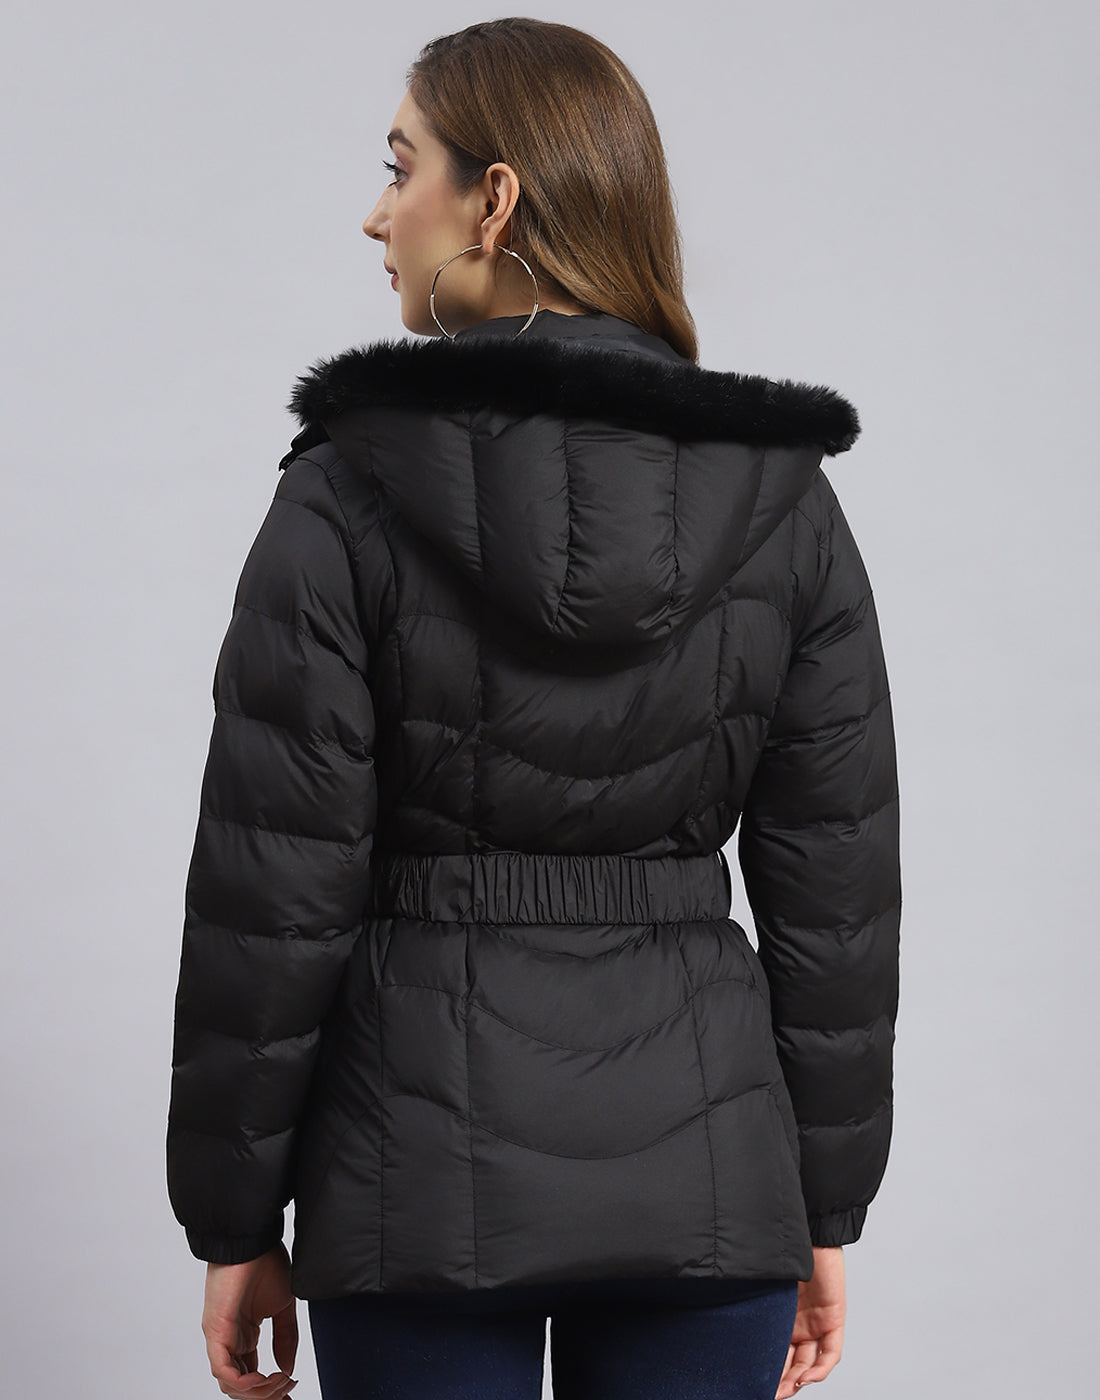 Ladies Winter Jacket at Best Price from Manufacturers, Suppliers & Dealers